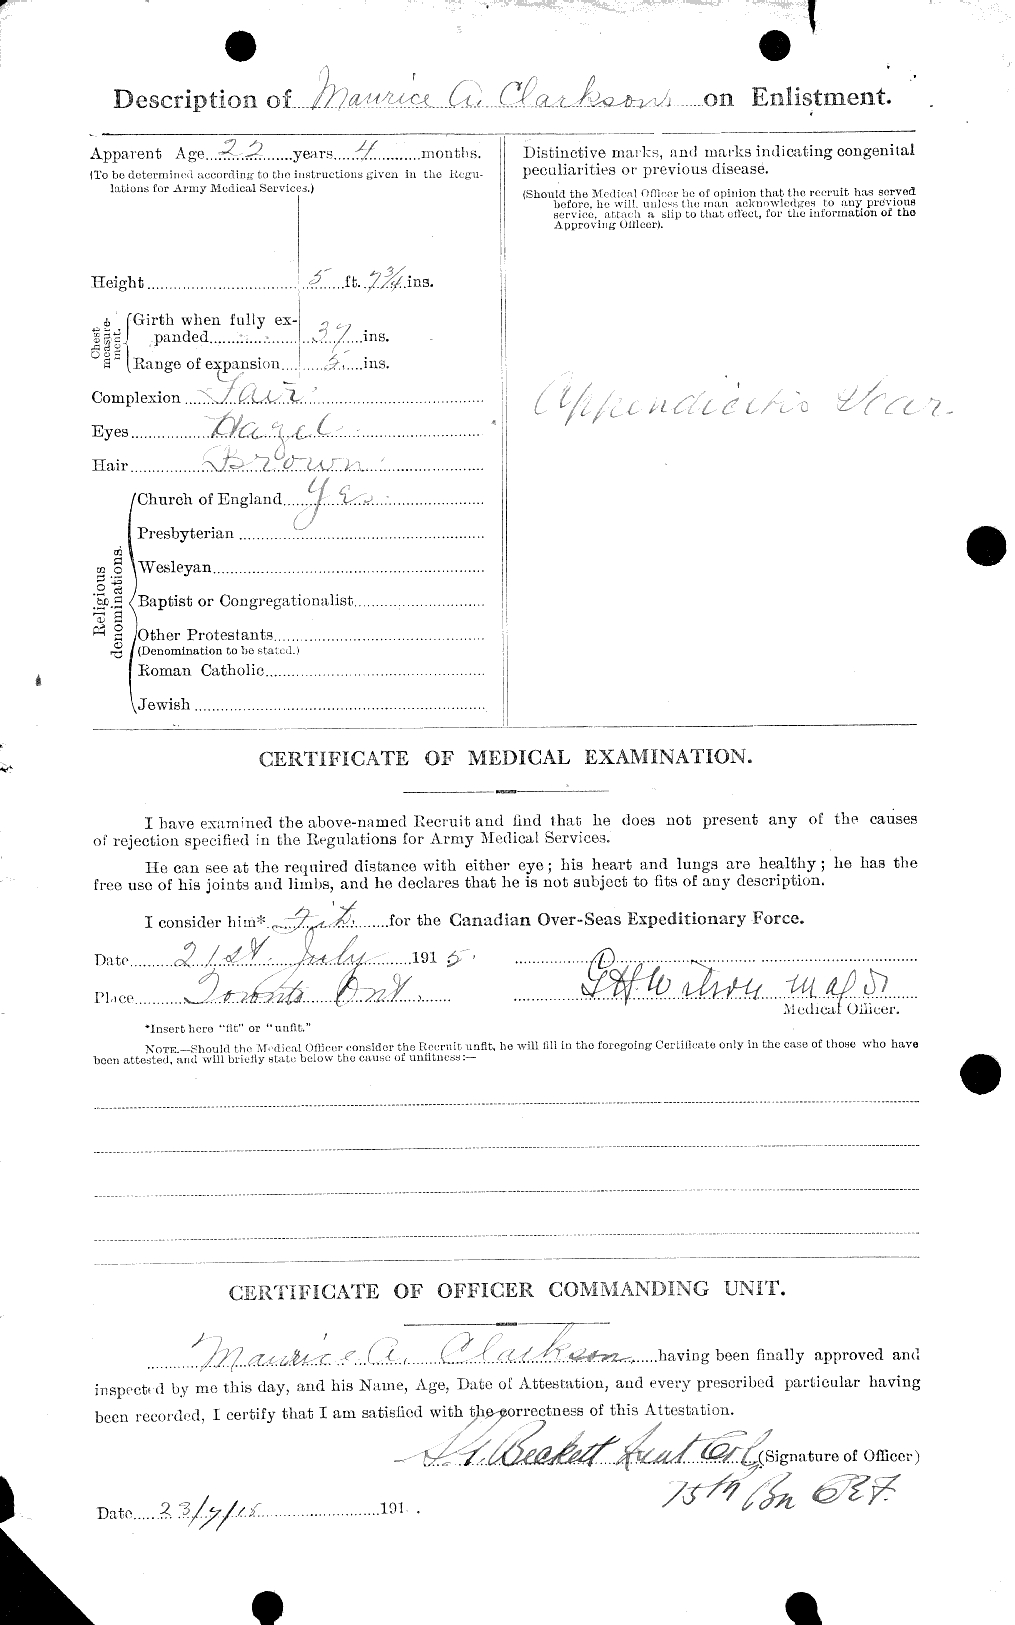 Personnel Records of the First World War - CEF 021463b